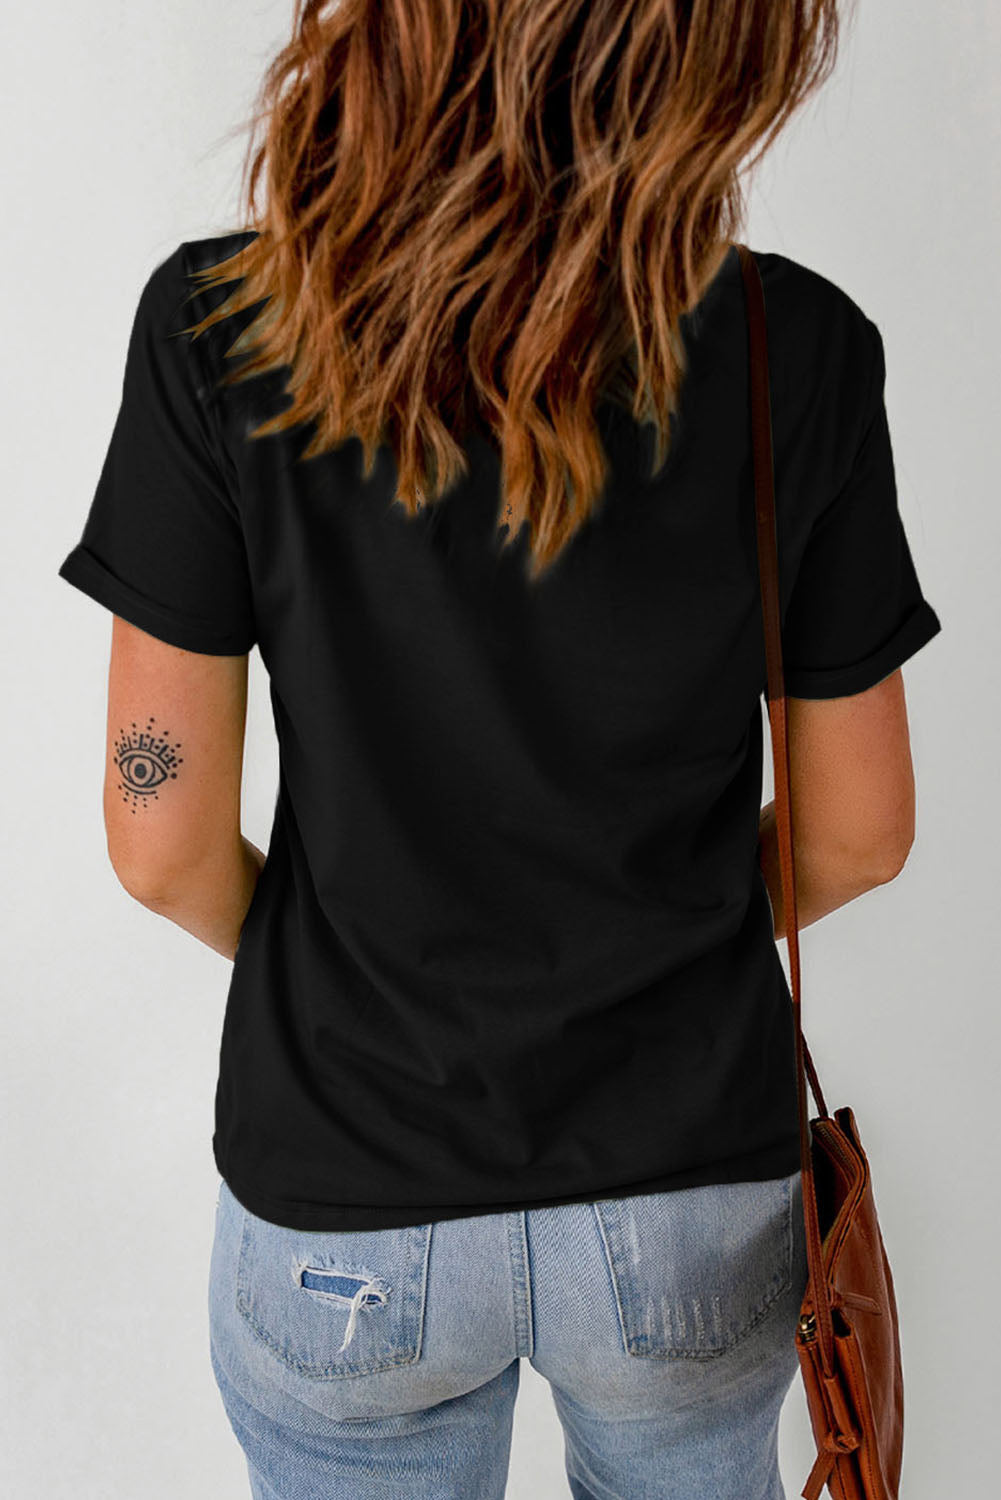 BE KIND Graphic Short Sleeve Tee